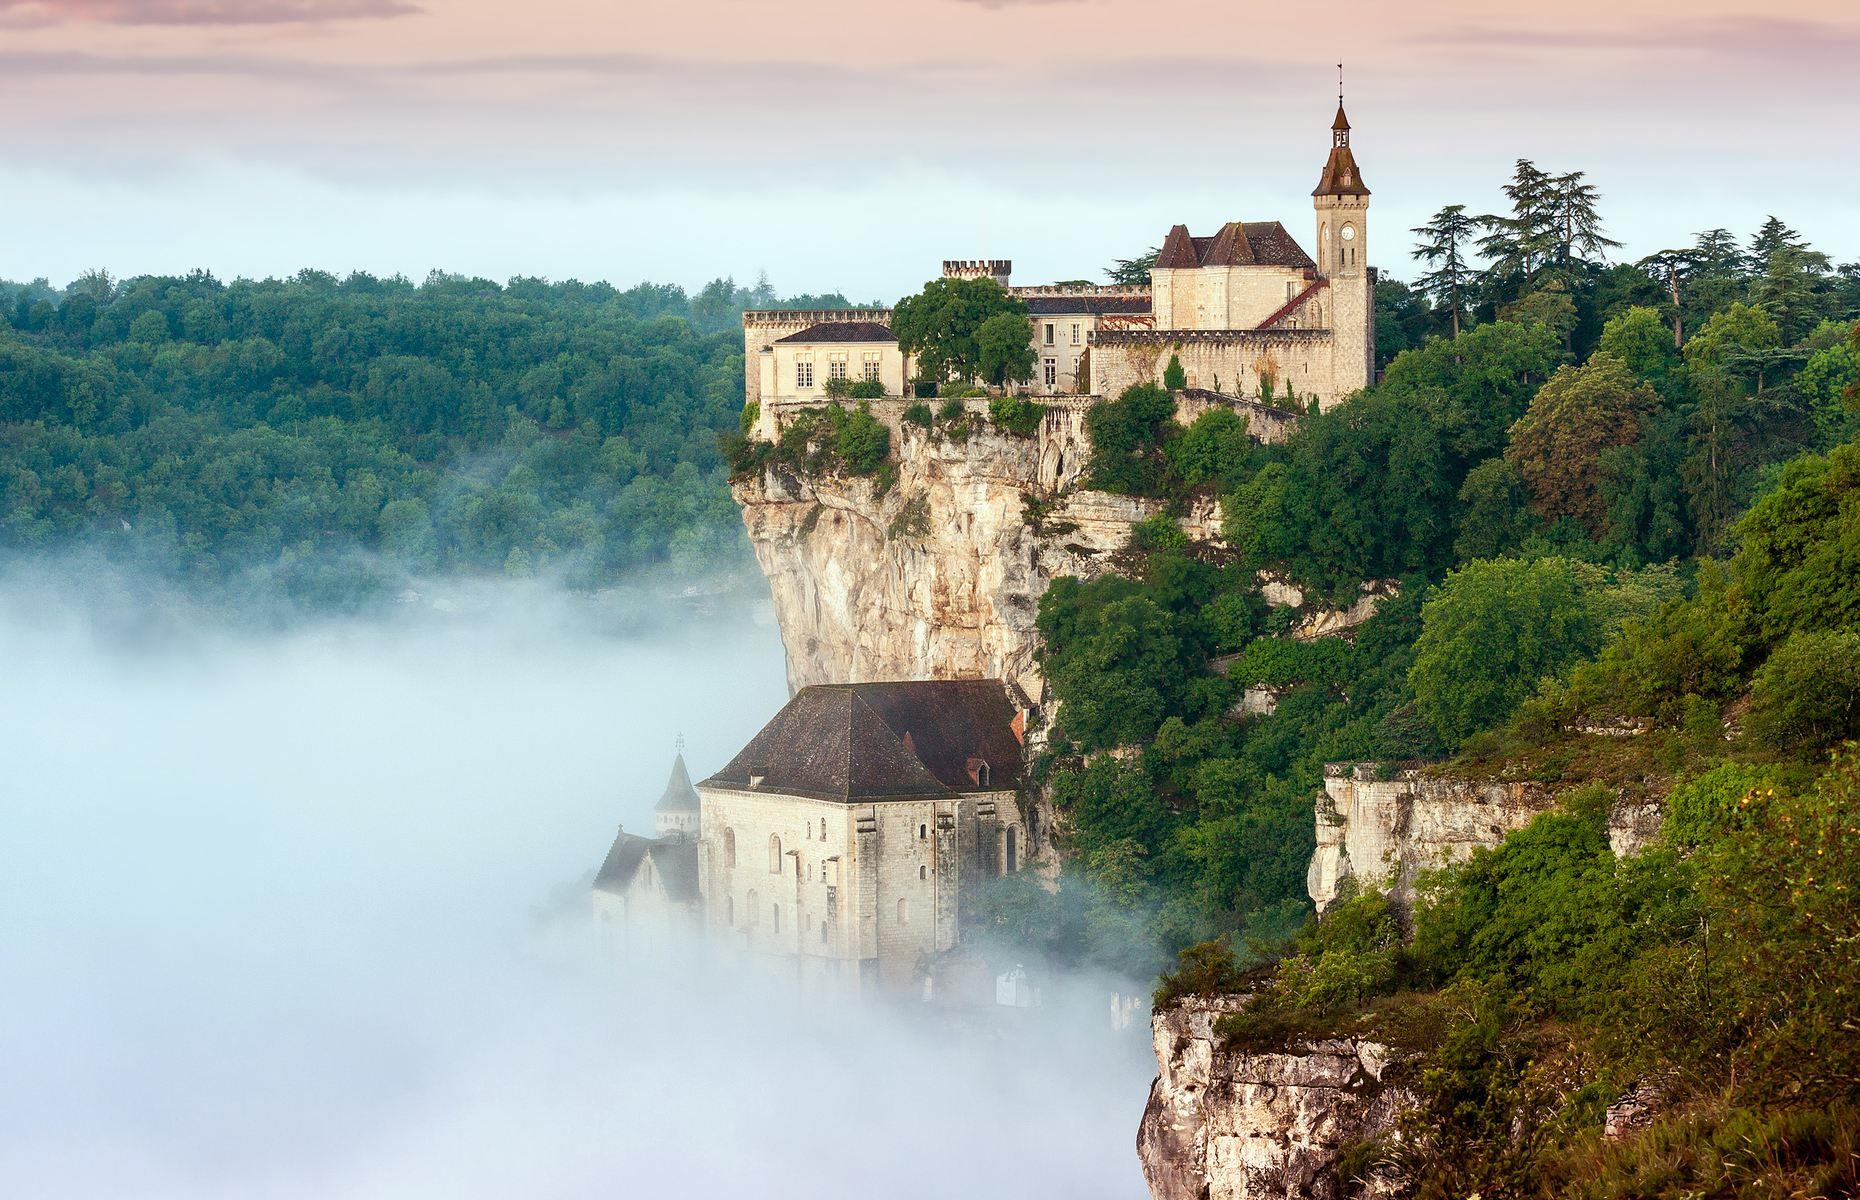 <p>The clifftop town of Rocamadour looks especially enchanting in this cloud-draped shot. Crowned by a 14th-century château, it comprises a cluster of historic buildings clinging to the cliffs at varying levels above the gorge of the Alzou River. The UNESCO World Heritage Site started life as a hermitage for Saint Amadour in the 12th century, and for the next 300 years it served as a popular pilgrimage location, during which time a number of important religious buildings and fortifications were added.</p>